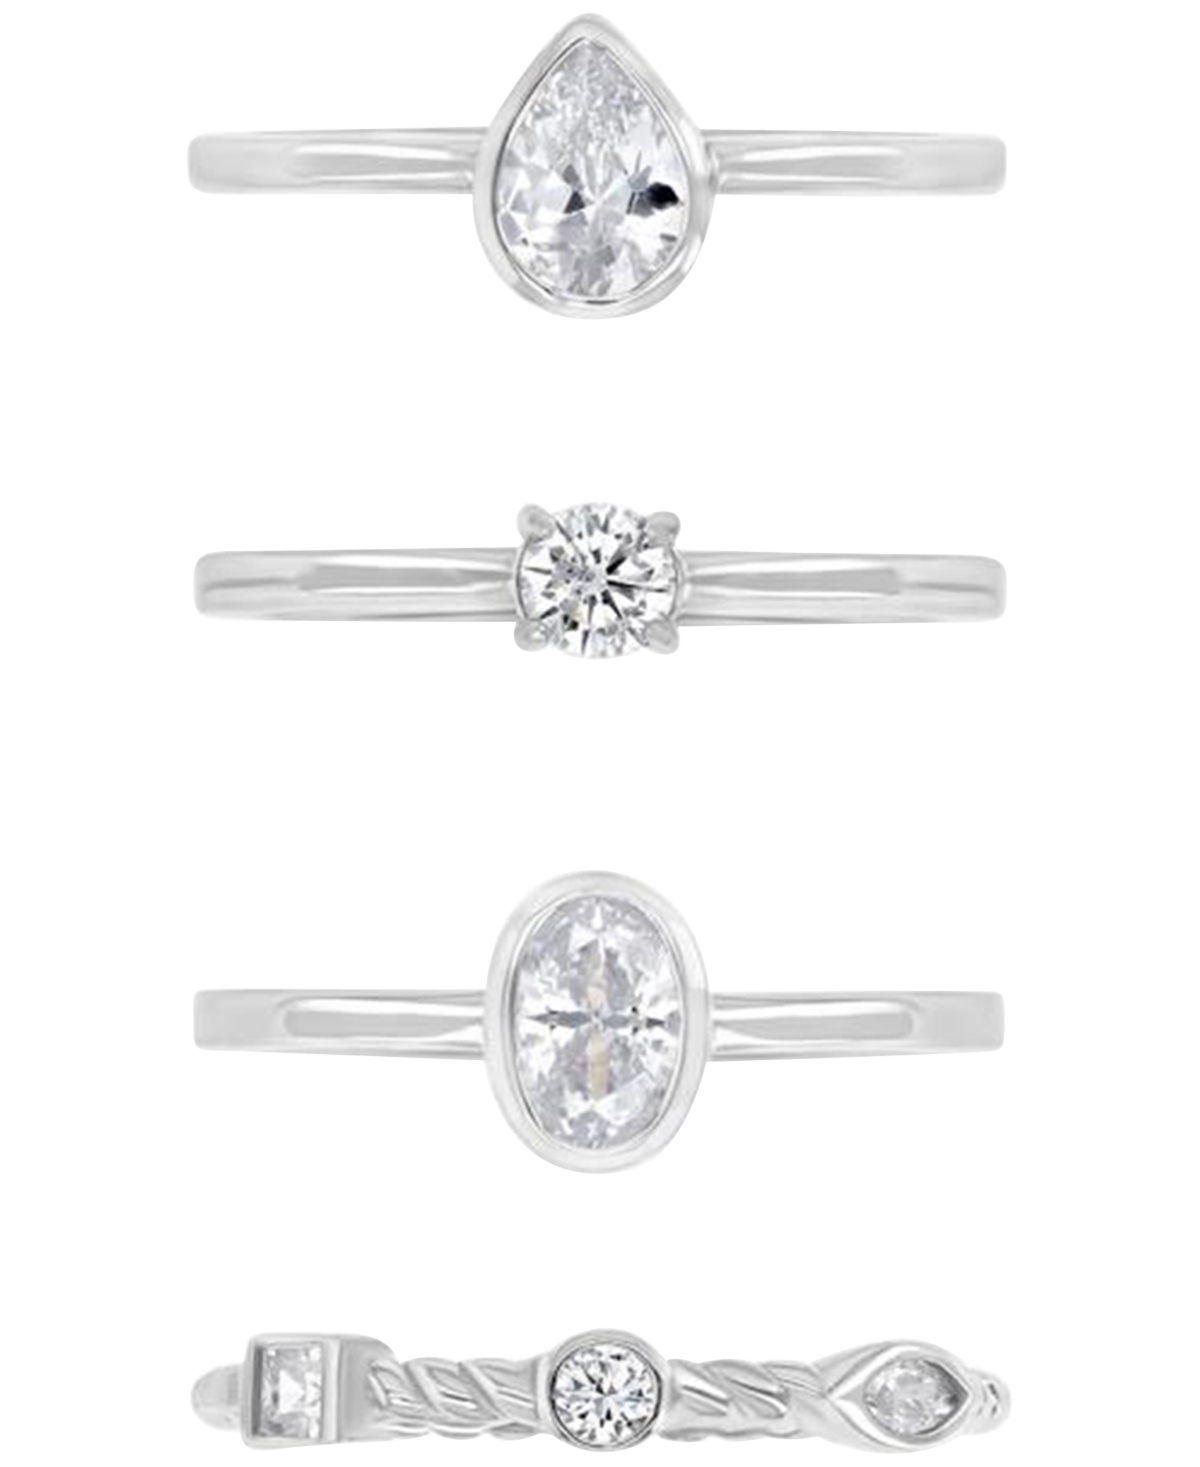 4-Pc. Set Cubic Zirconia Mixed-Cut Bezel & Claw Set Stack Rings - Gold